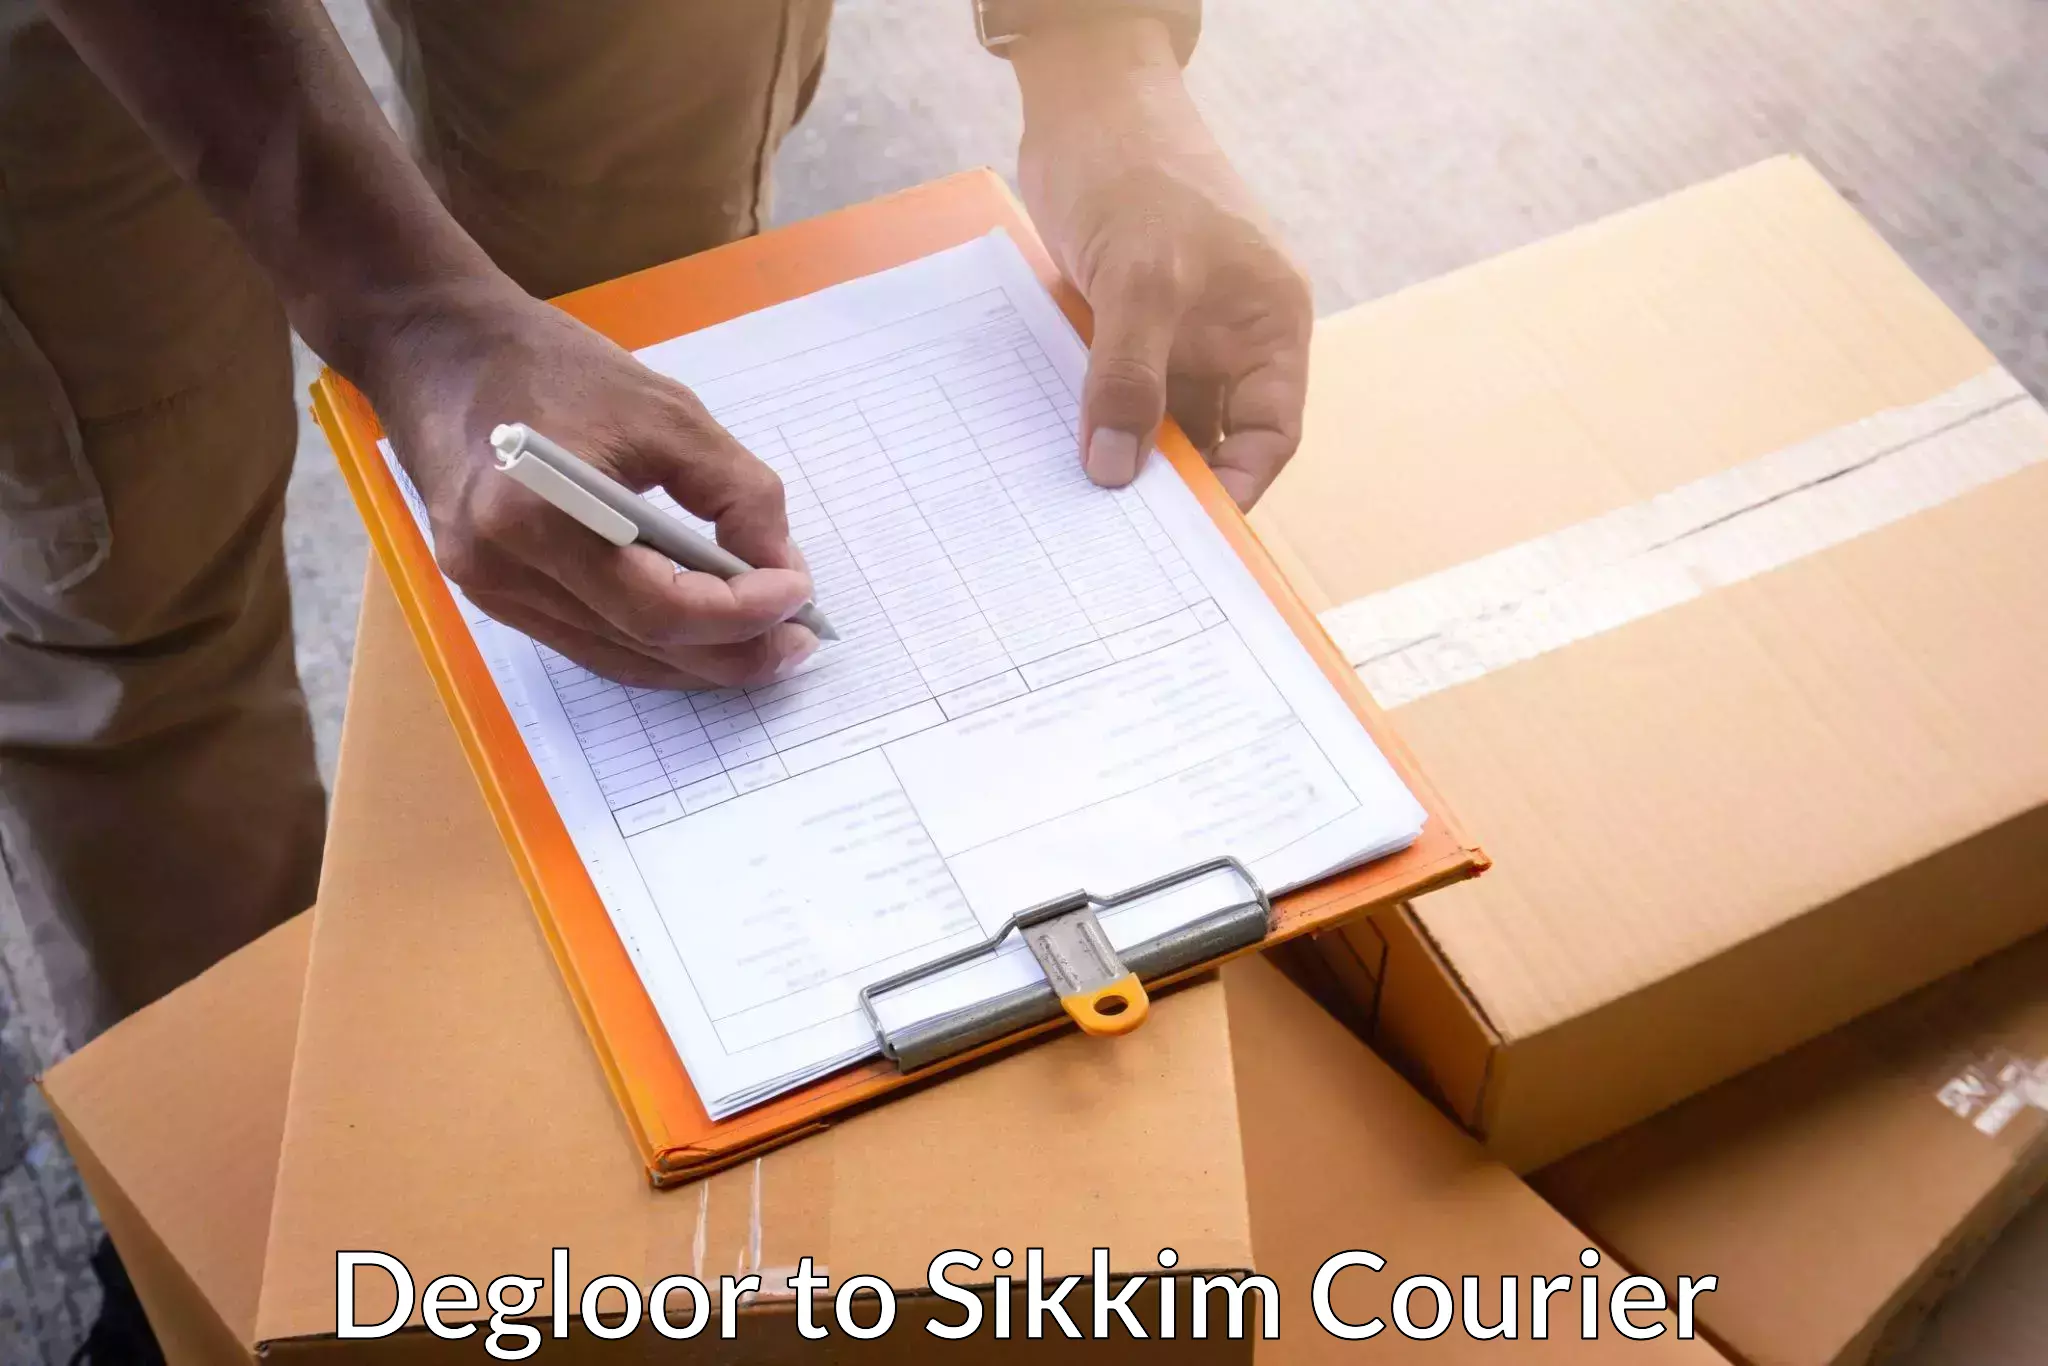 Automated shipping processes Degloor to Sikkim